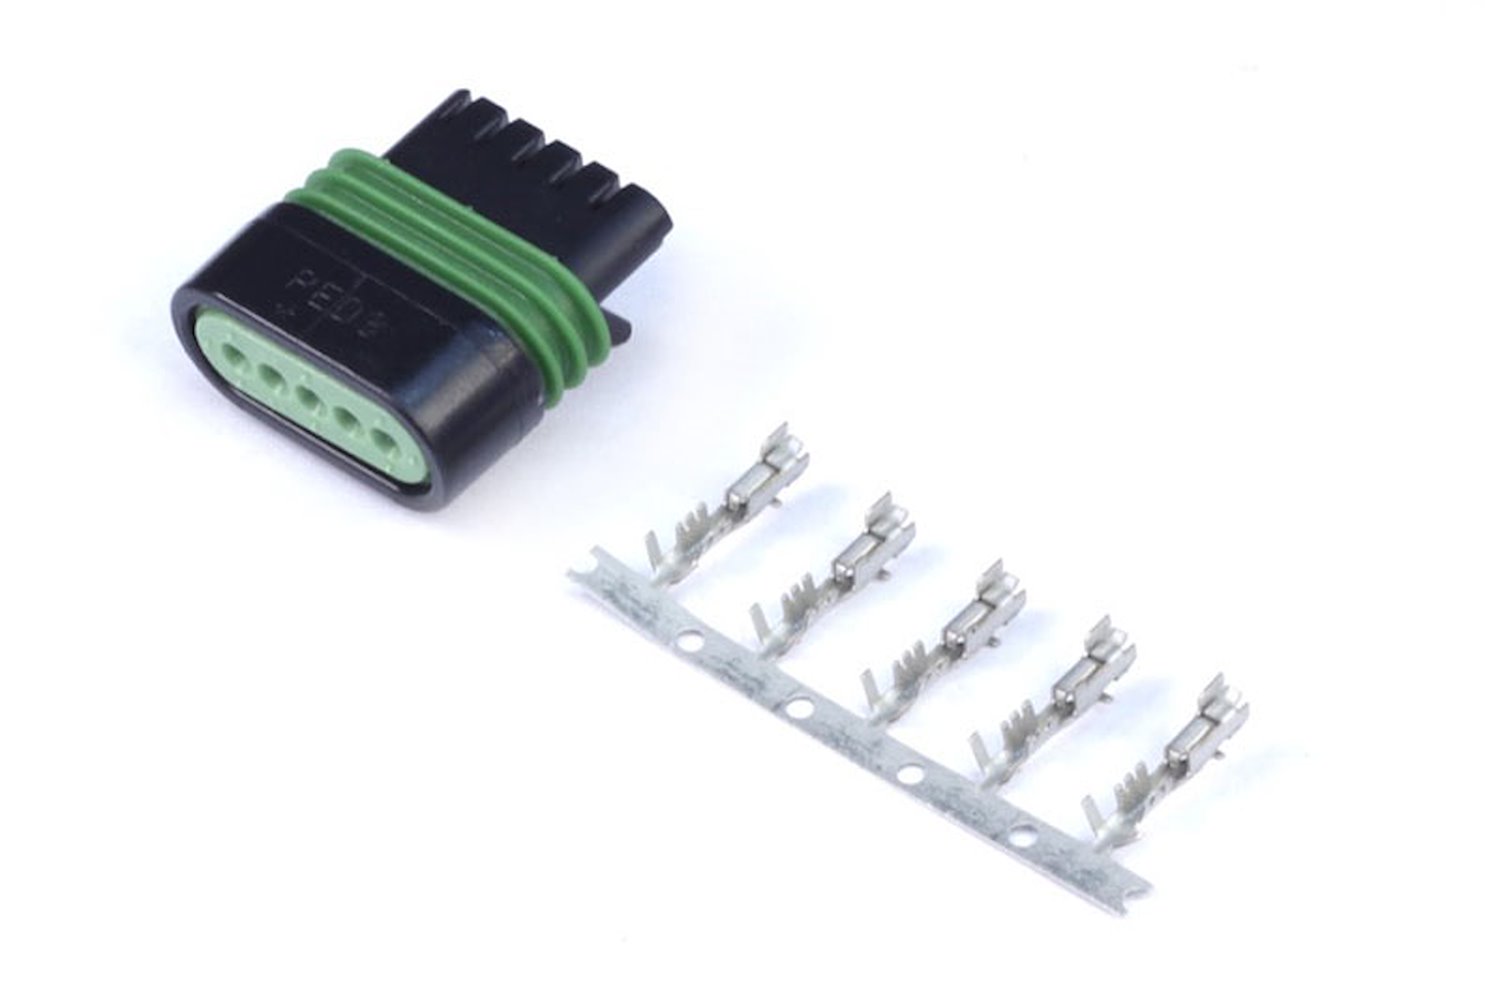 HT-020115 Plugs and-Pins Only, IGN-1A IGBT Coil with Ignitor